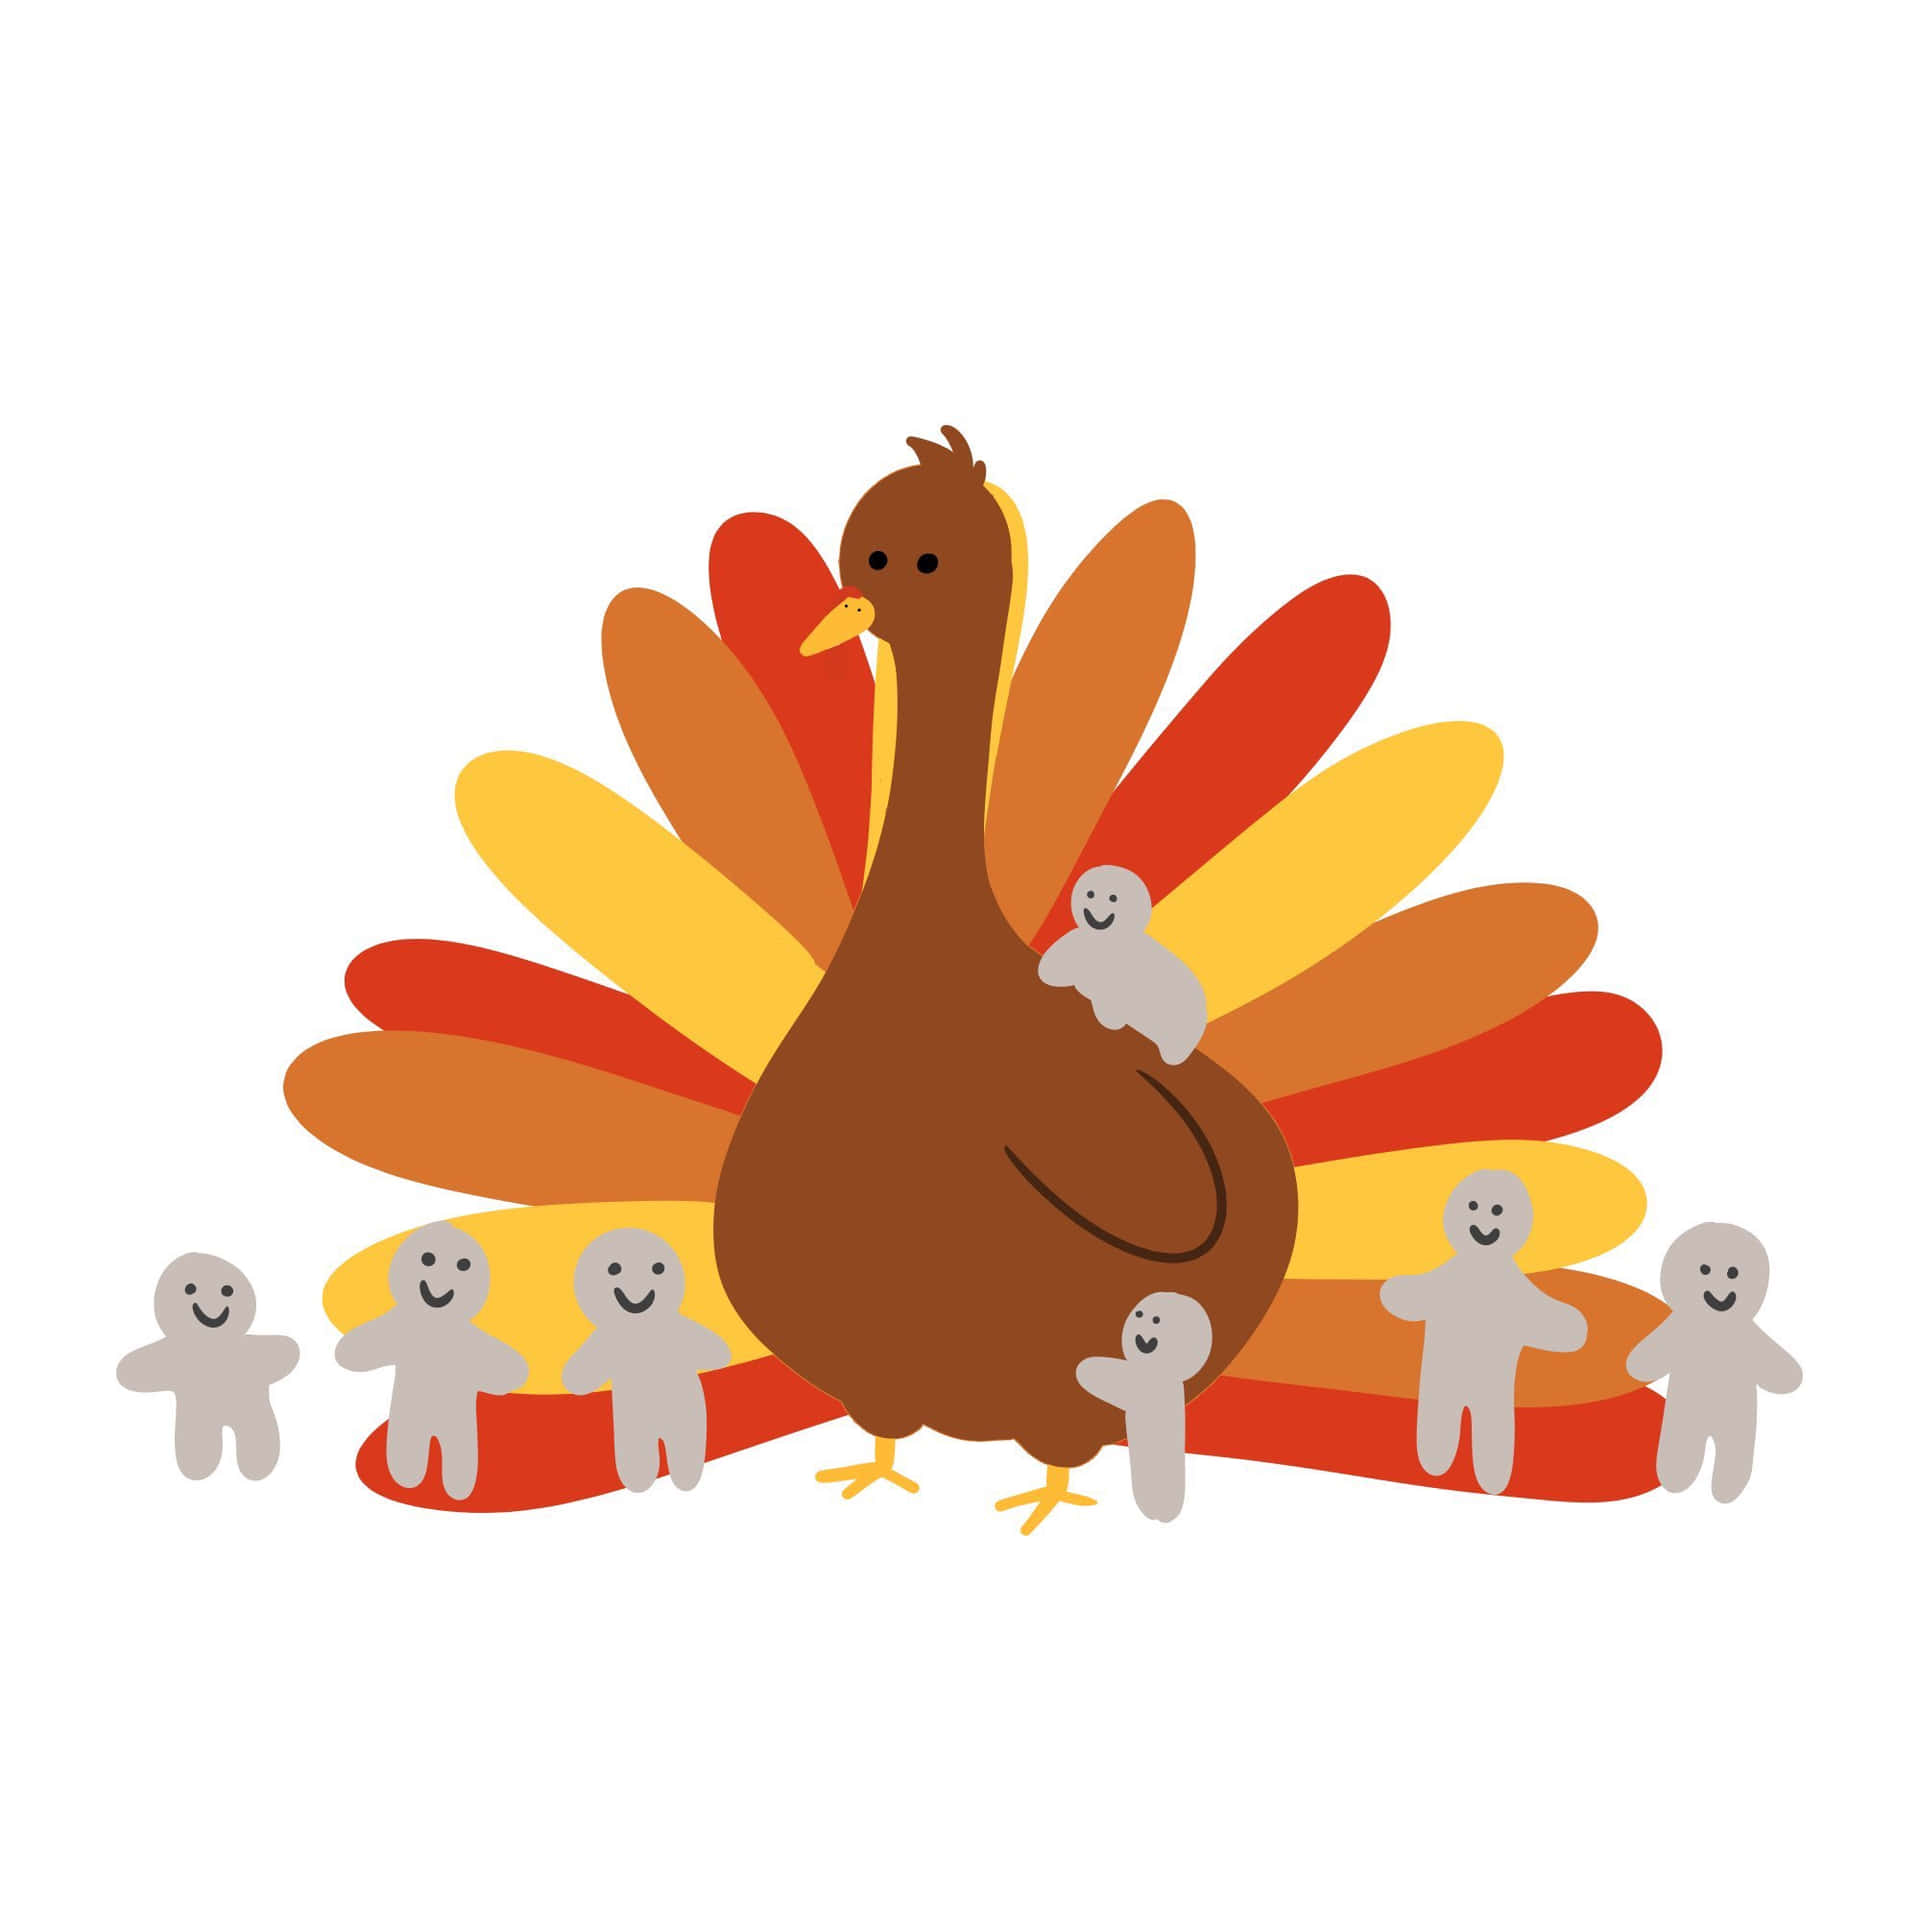 Thanksgiving Zoom Background Cartoon Turkey Surrounded By Smiling People